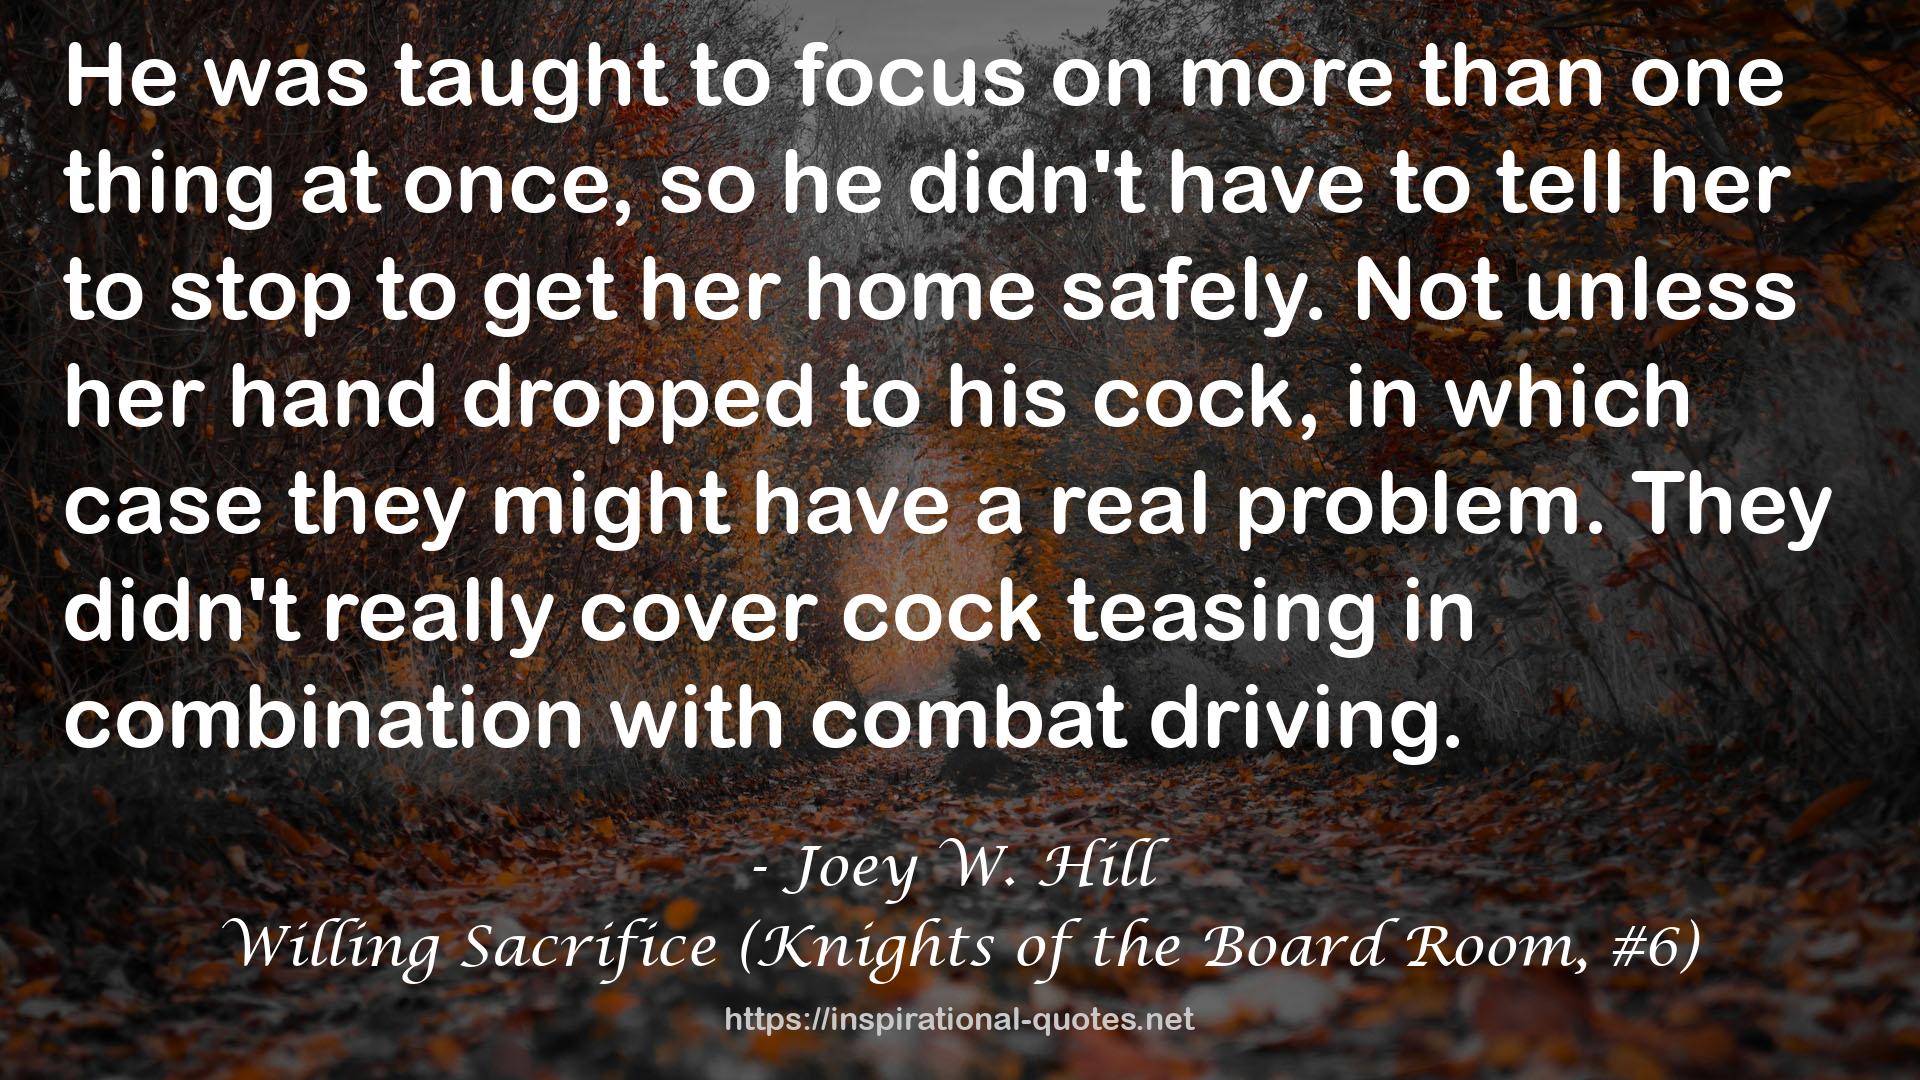 Willing Sacrifice (Knights of the Board Room, #6) QUOTES